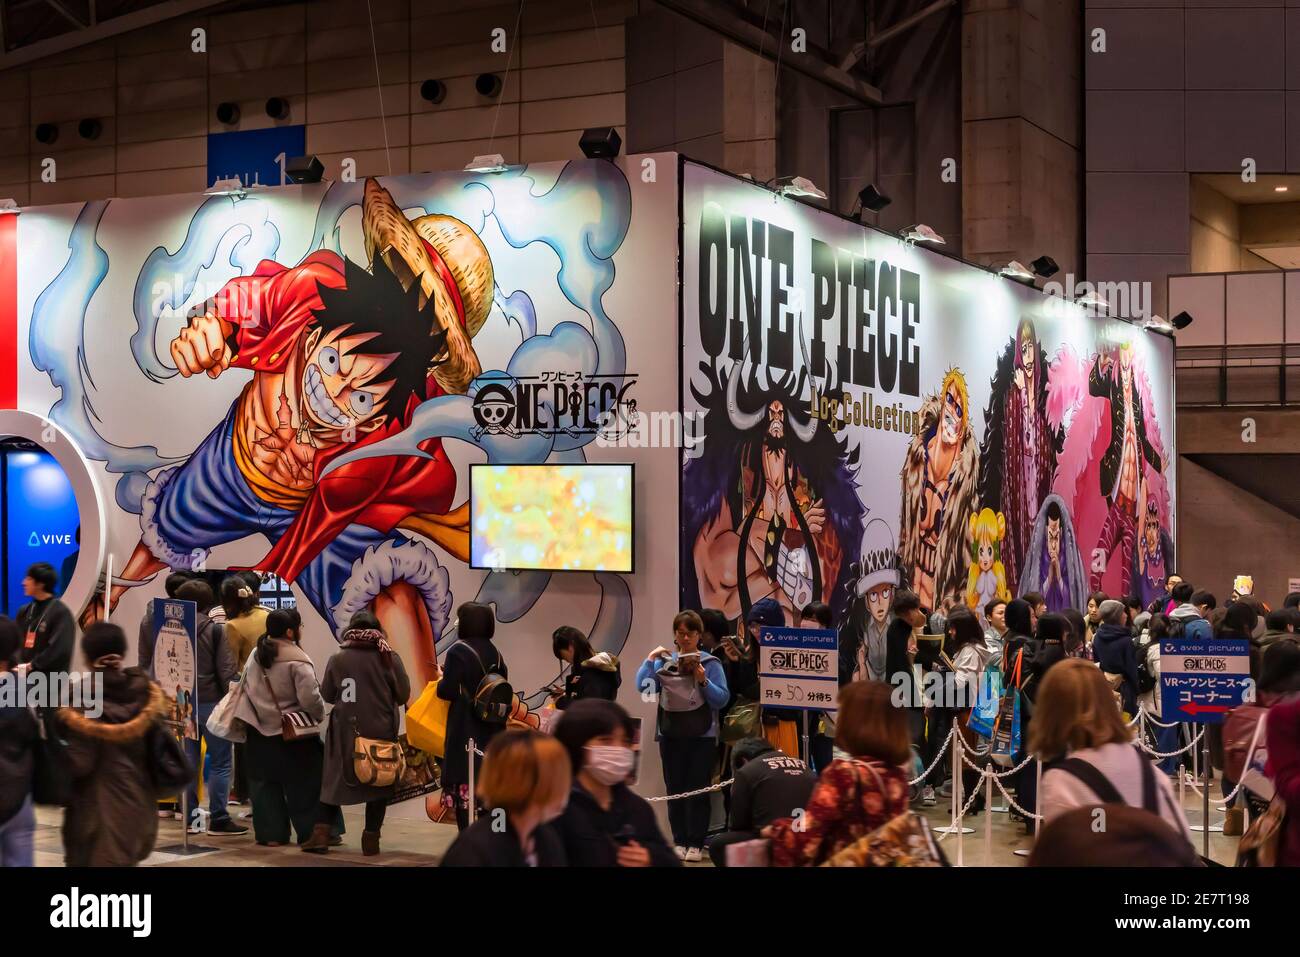 One piece Stampede' Poster by OnePieceTreasure, Displate